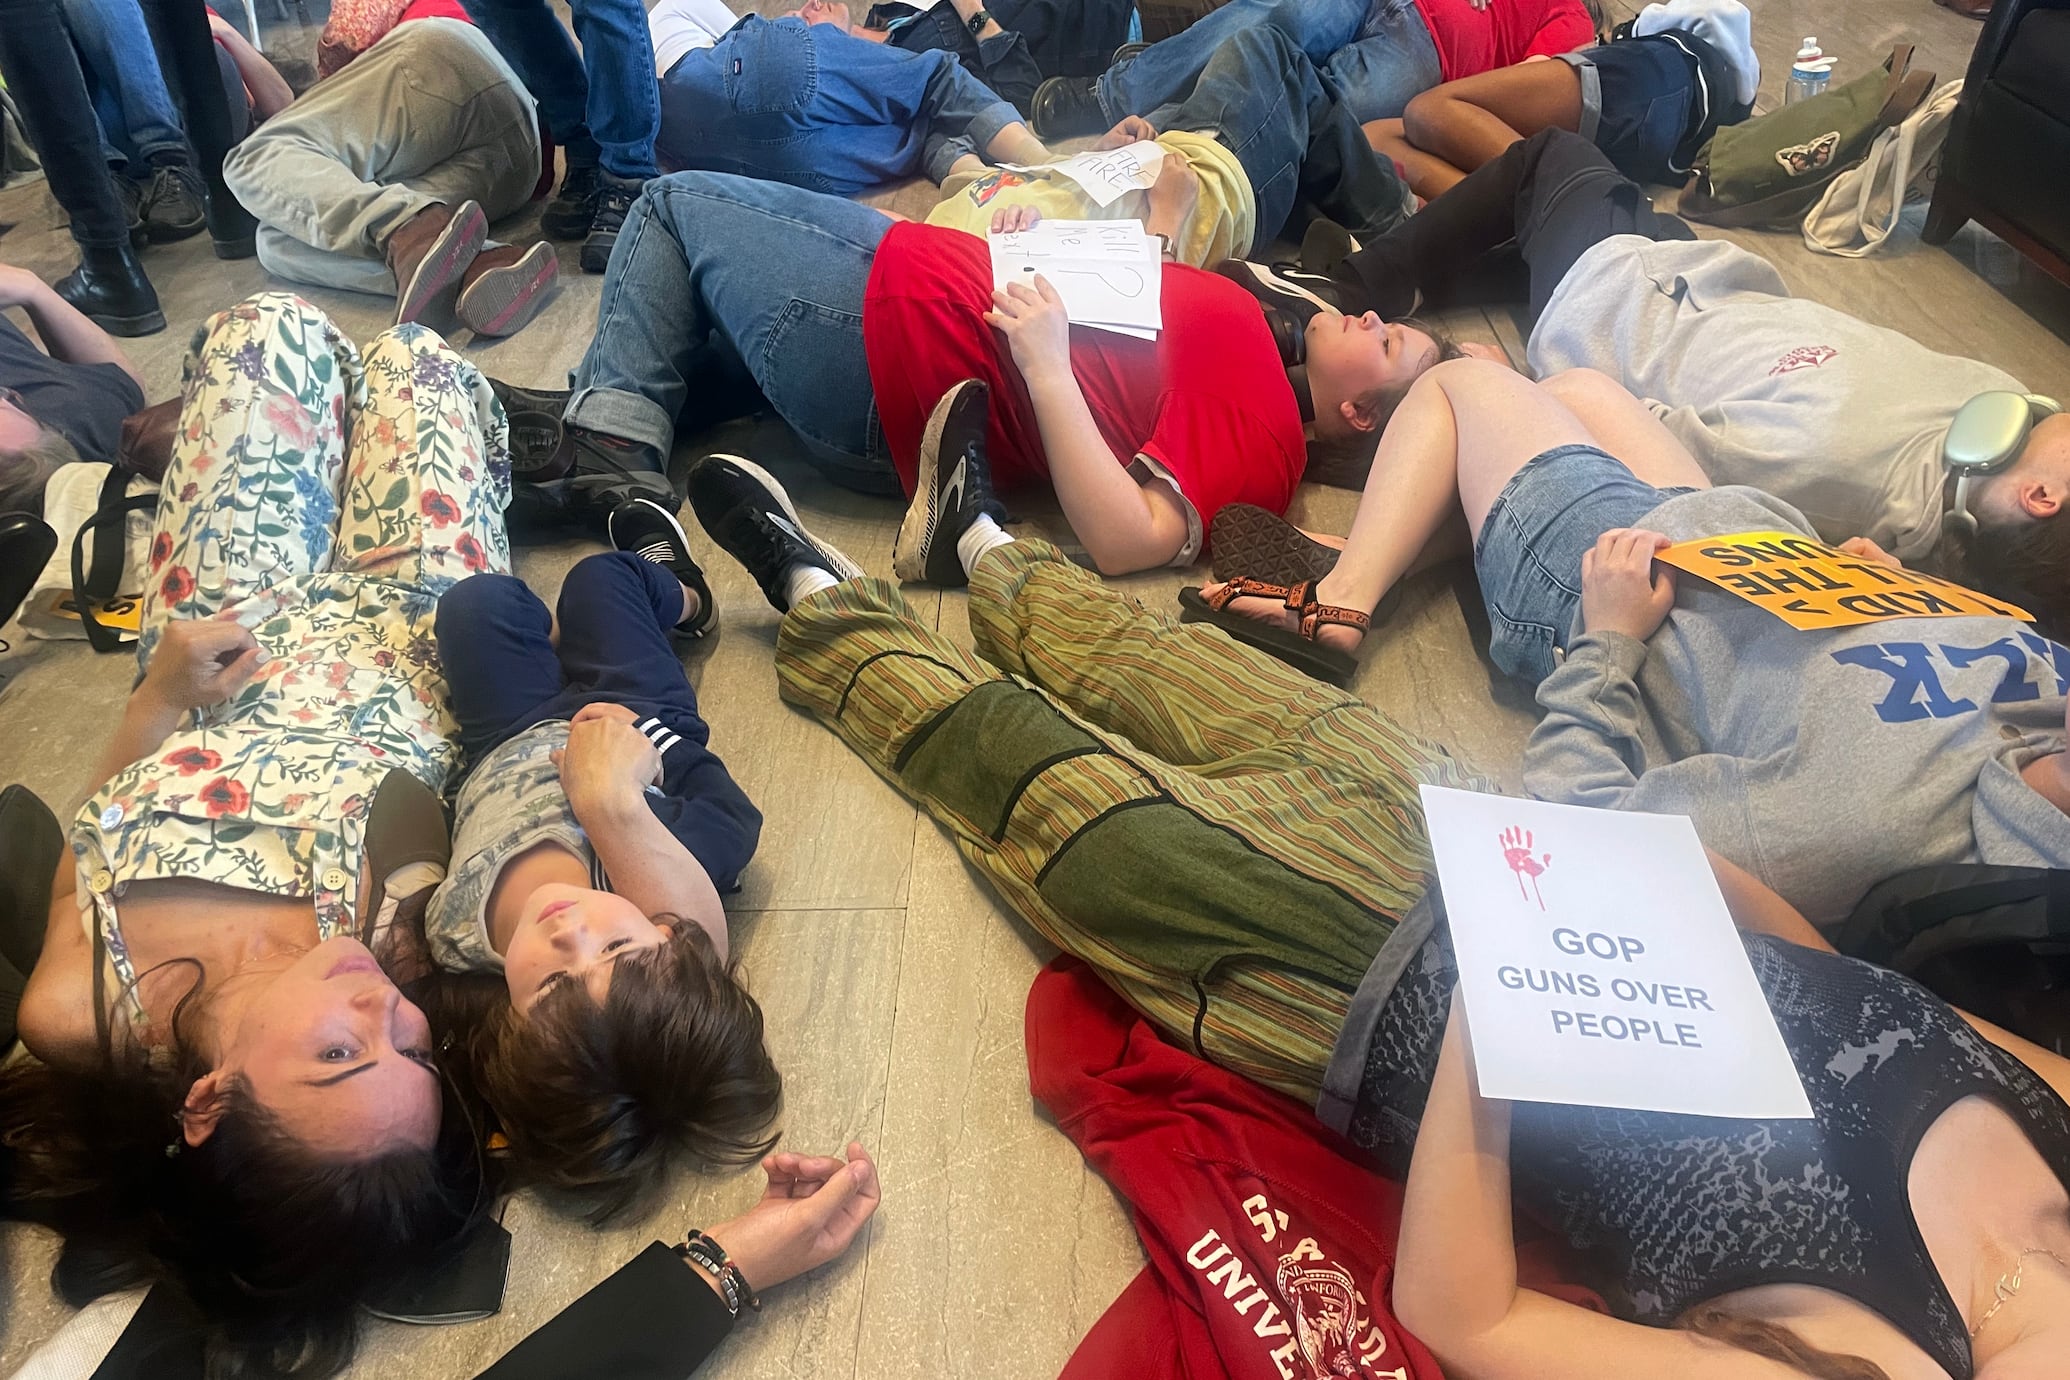 A group of people lie on the floor next to each other in a "die in" protest. Some are holding signs.